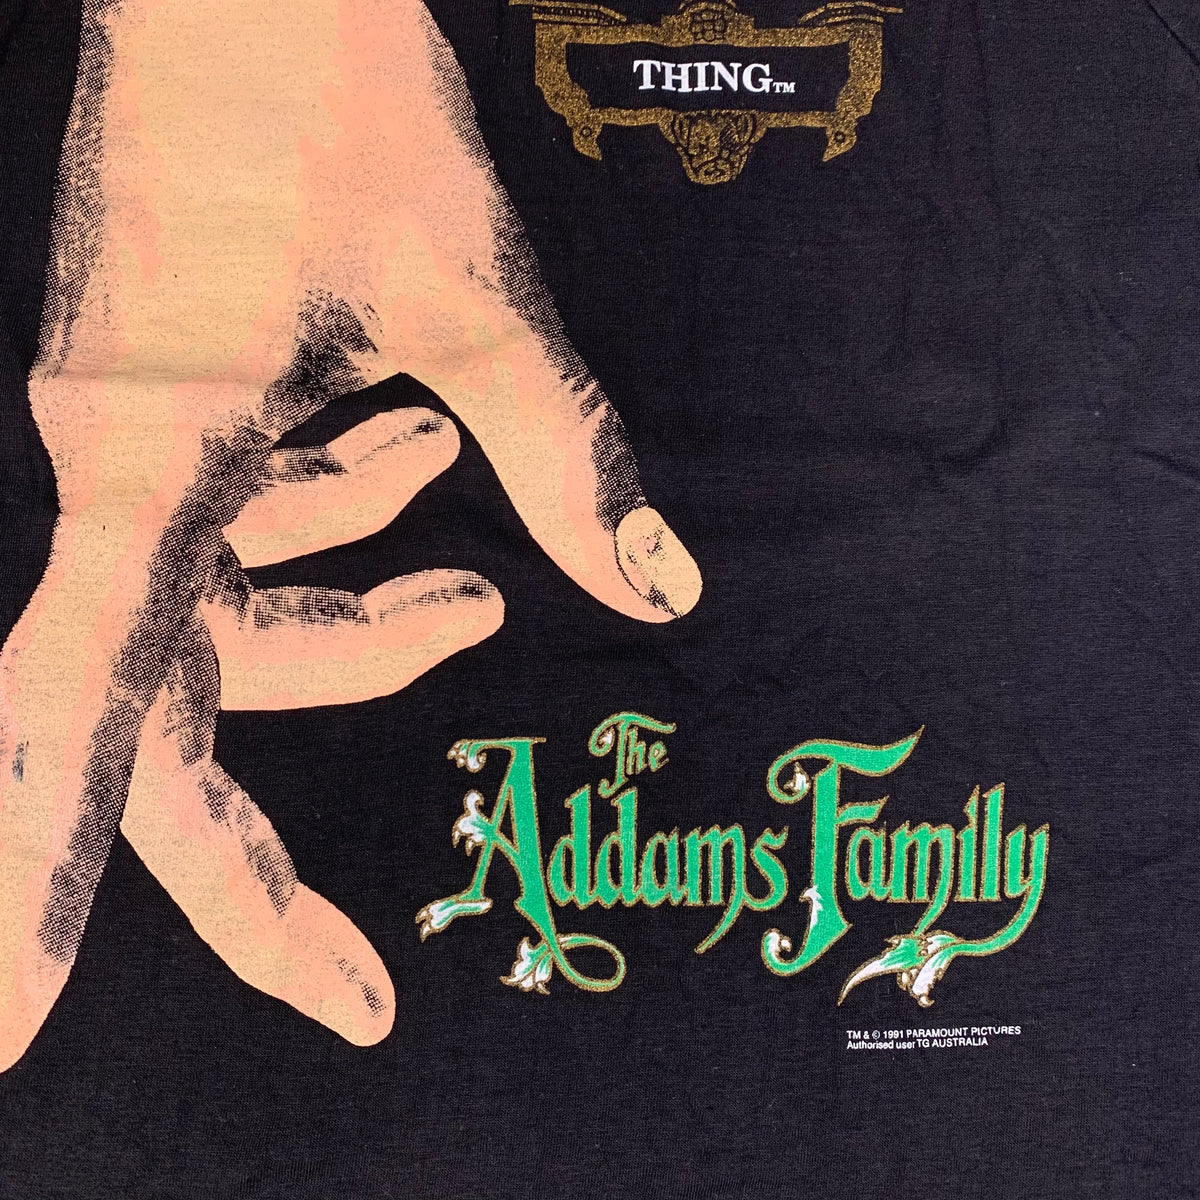 Vintage The Addams Family &quot;Thing&quot; Paramount Pictures Promotional T-Shirt